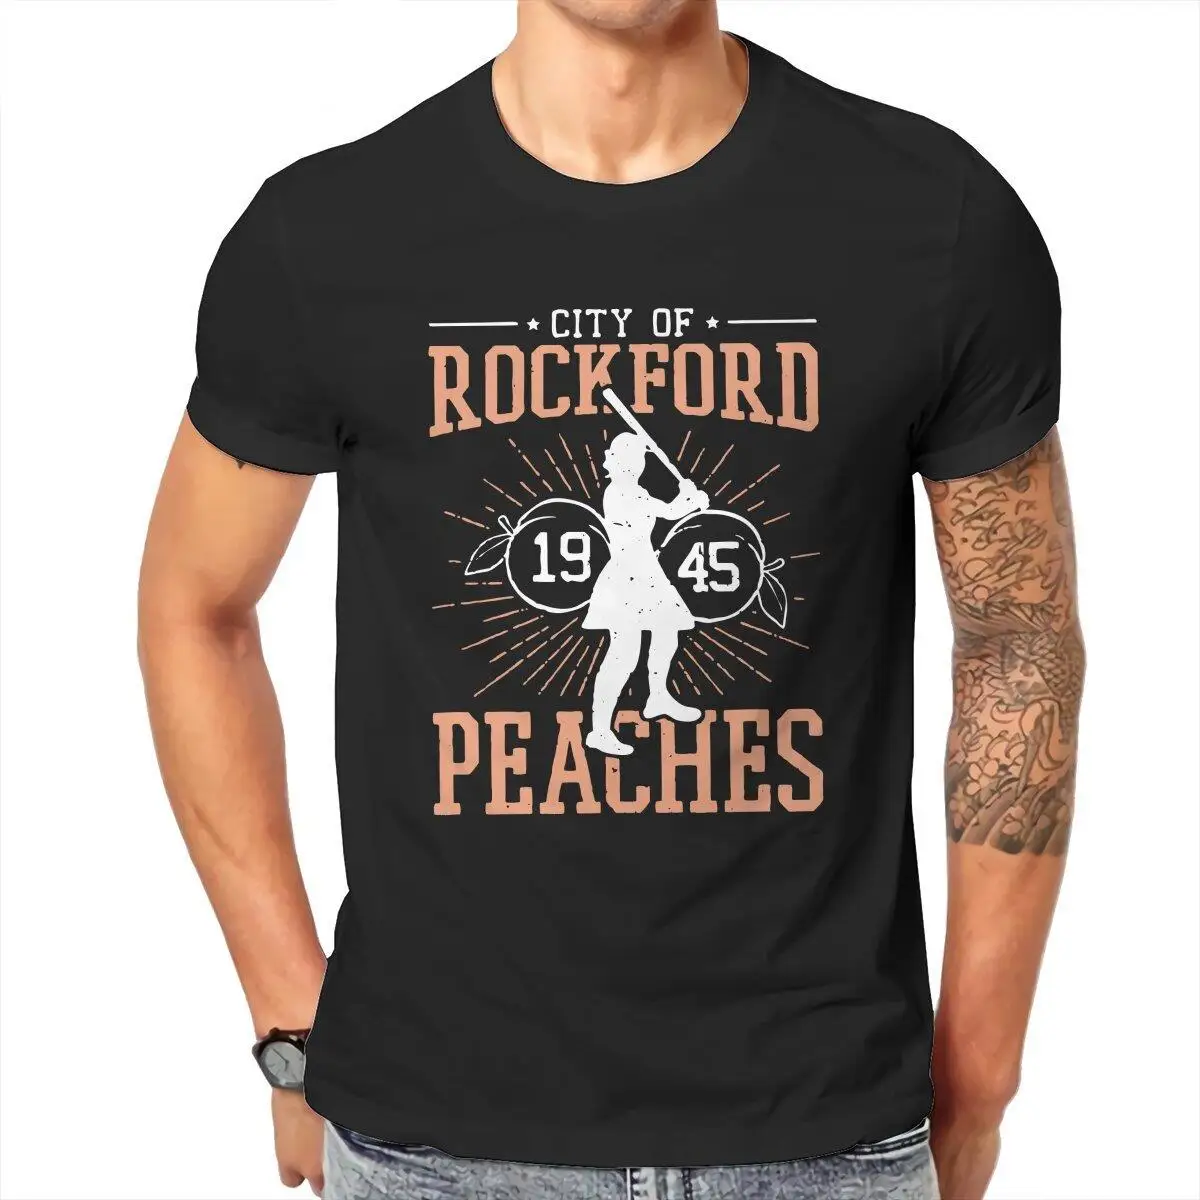 Baseball Rockford Peaches  T-Shirts Men A League of Their Own Funny Pure Cotton Tees Short Sleeve T Shirts Gift Idea Clothes